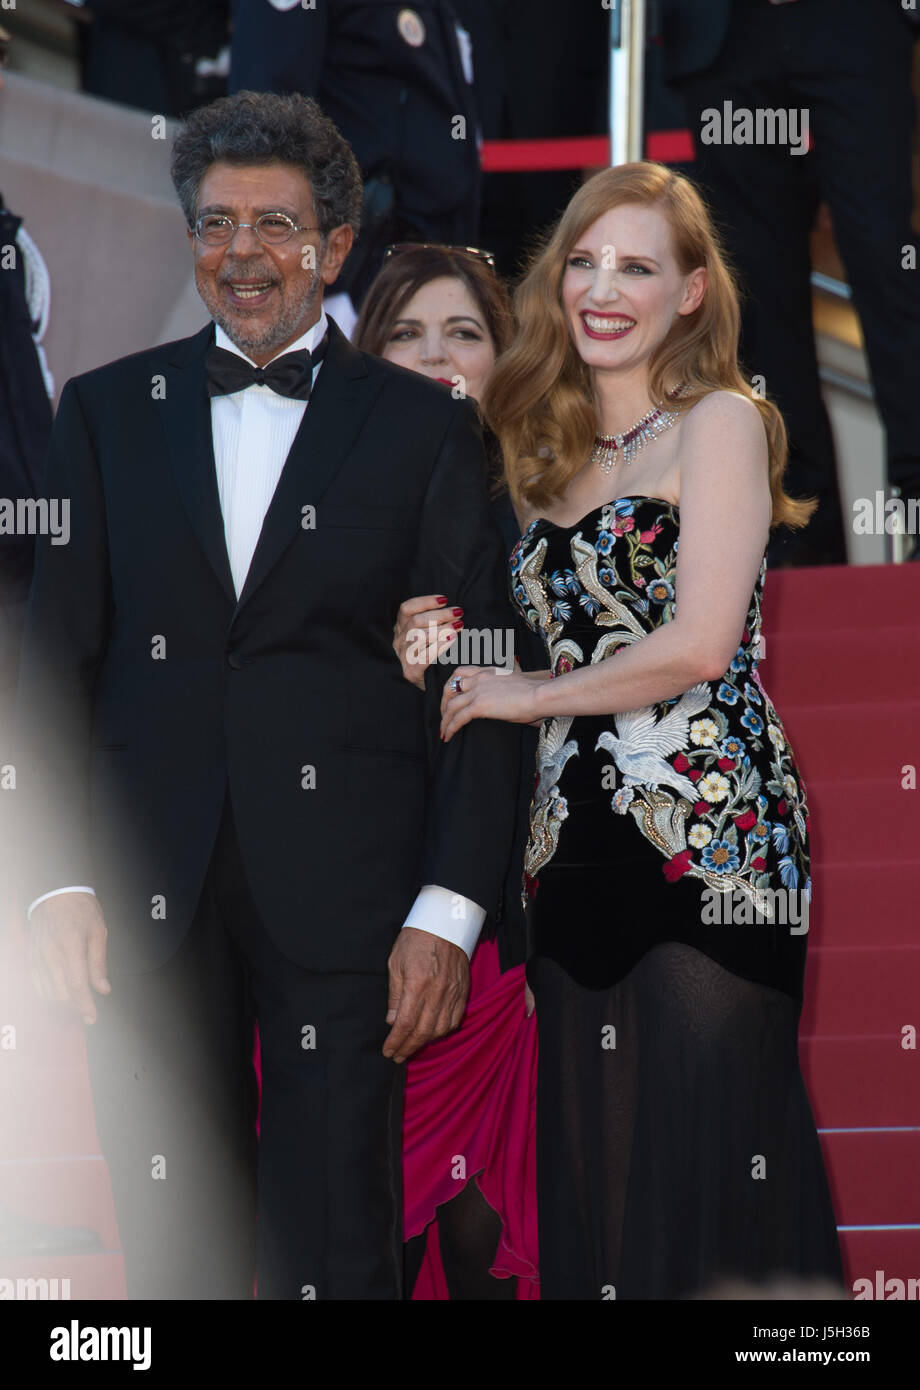 CANNES, FRANCE. May 17, 2017: Jessica Chastain & Gabriel Yared at the premiere for 'Ismael's Ghosts' at the opening ceremony of the 70th Festival de Cannes, Cannes, France.  Picture: Sarah Stewart Stock Photo